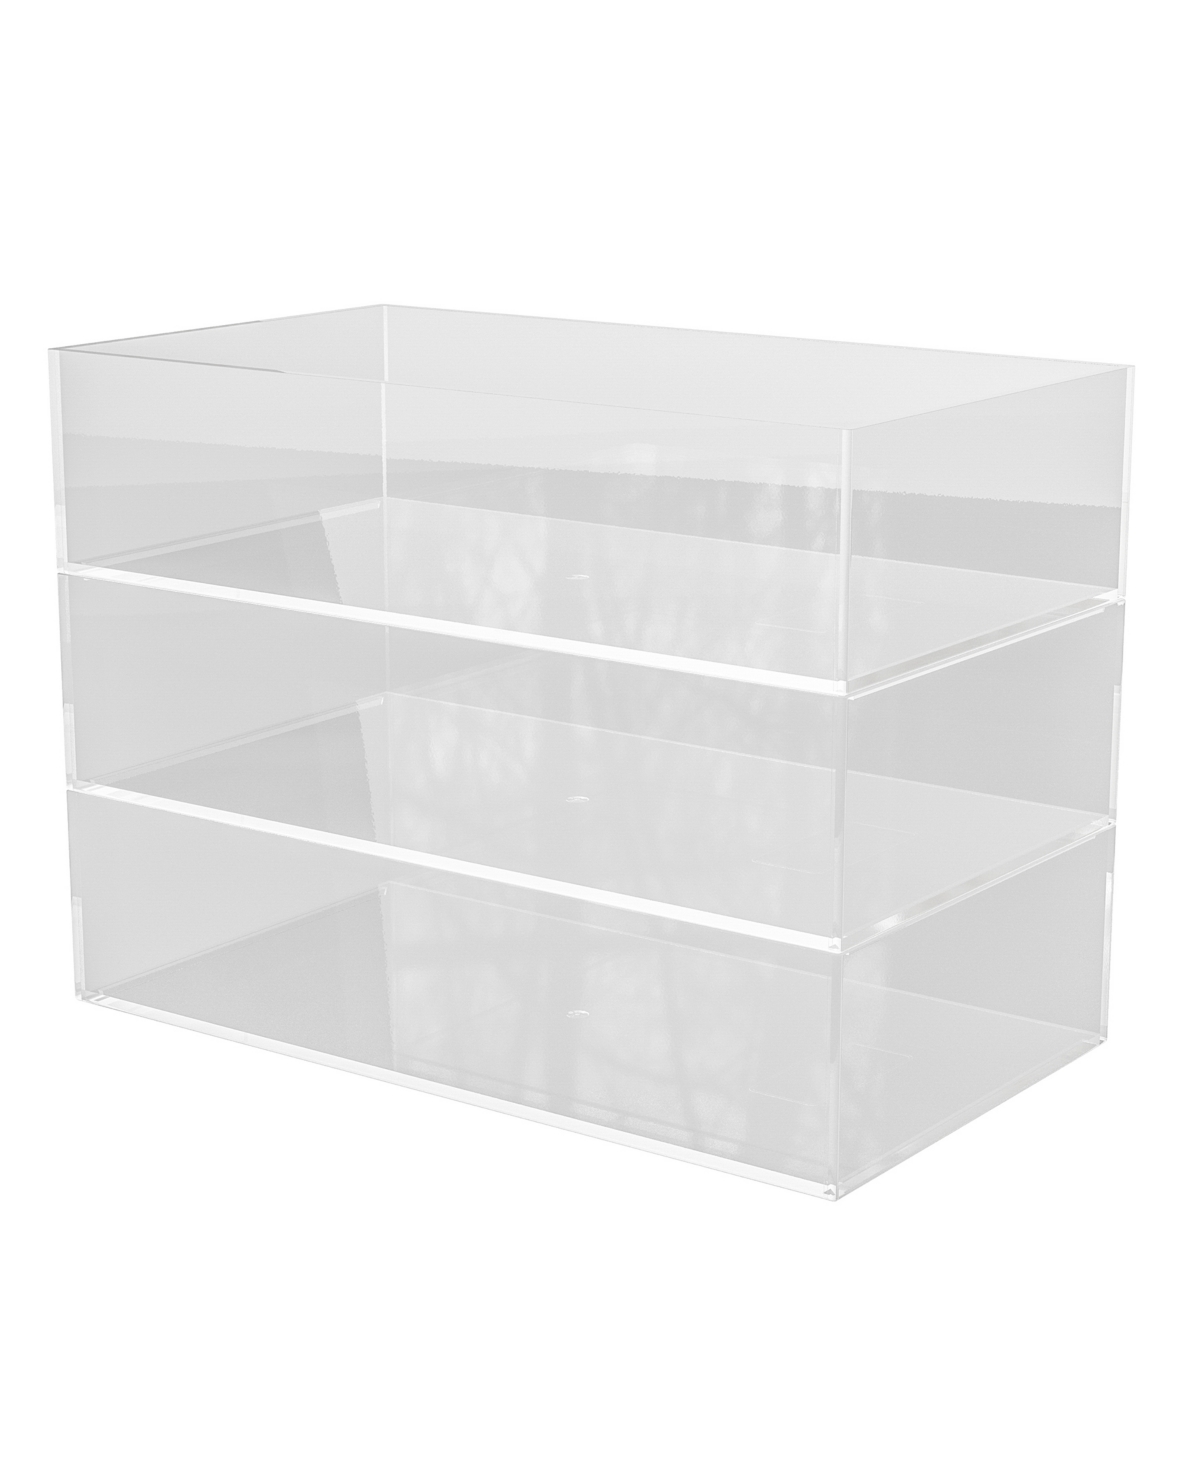 Brody 3 Pack Stack and Slide Plastic Tray Office Desktop Organizer, 3" x 7.5" - Clear